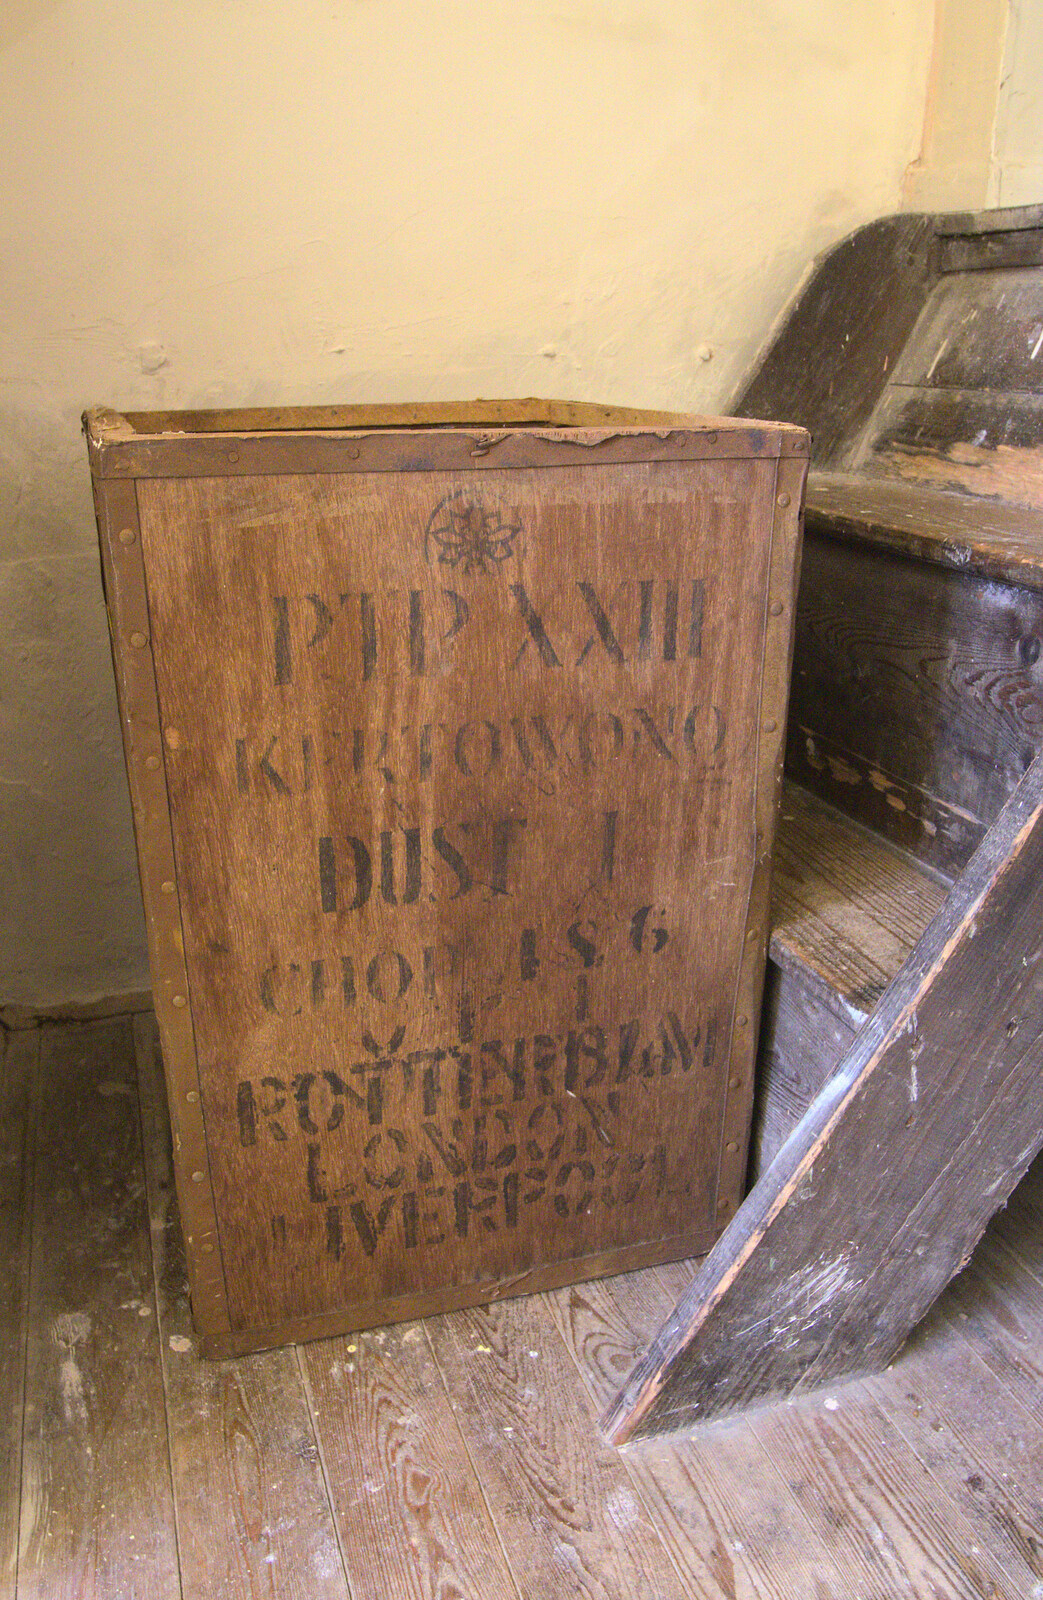 An old tea chest from The Eye Lights and a Thorpe Abbots Birthday, Suffolk and Norfolk - 6th December 2014